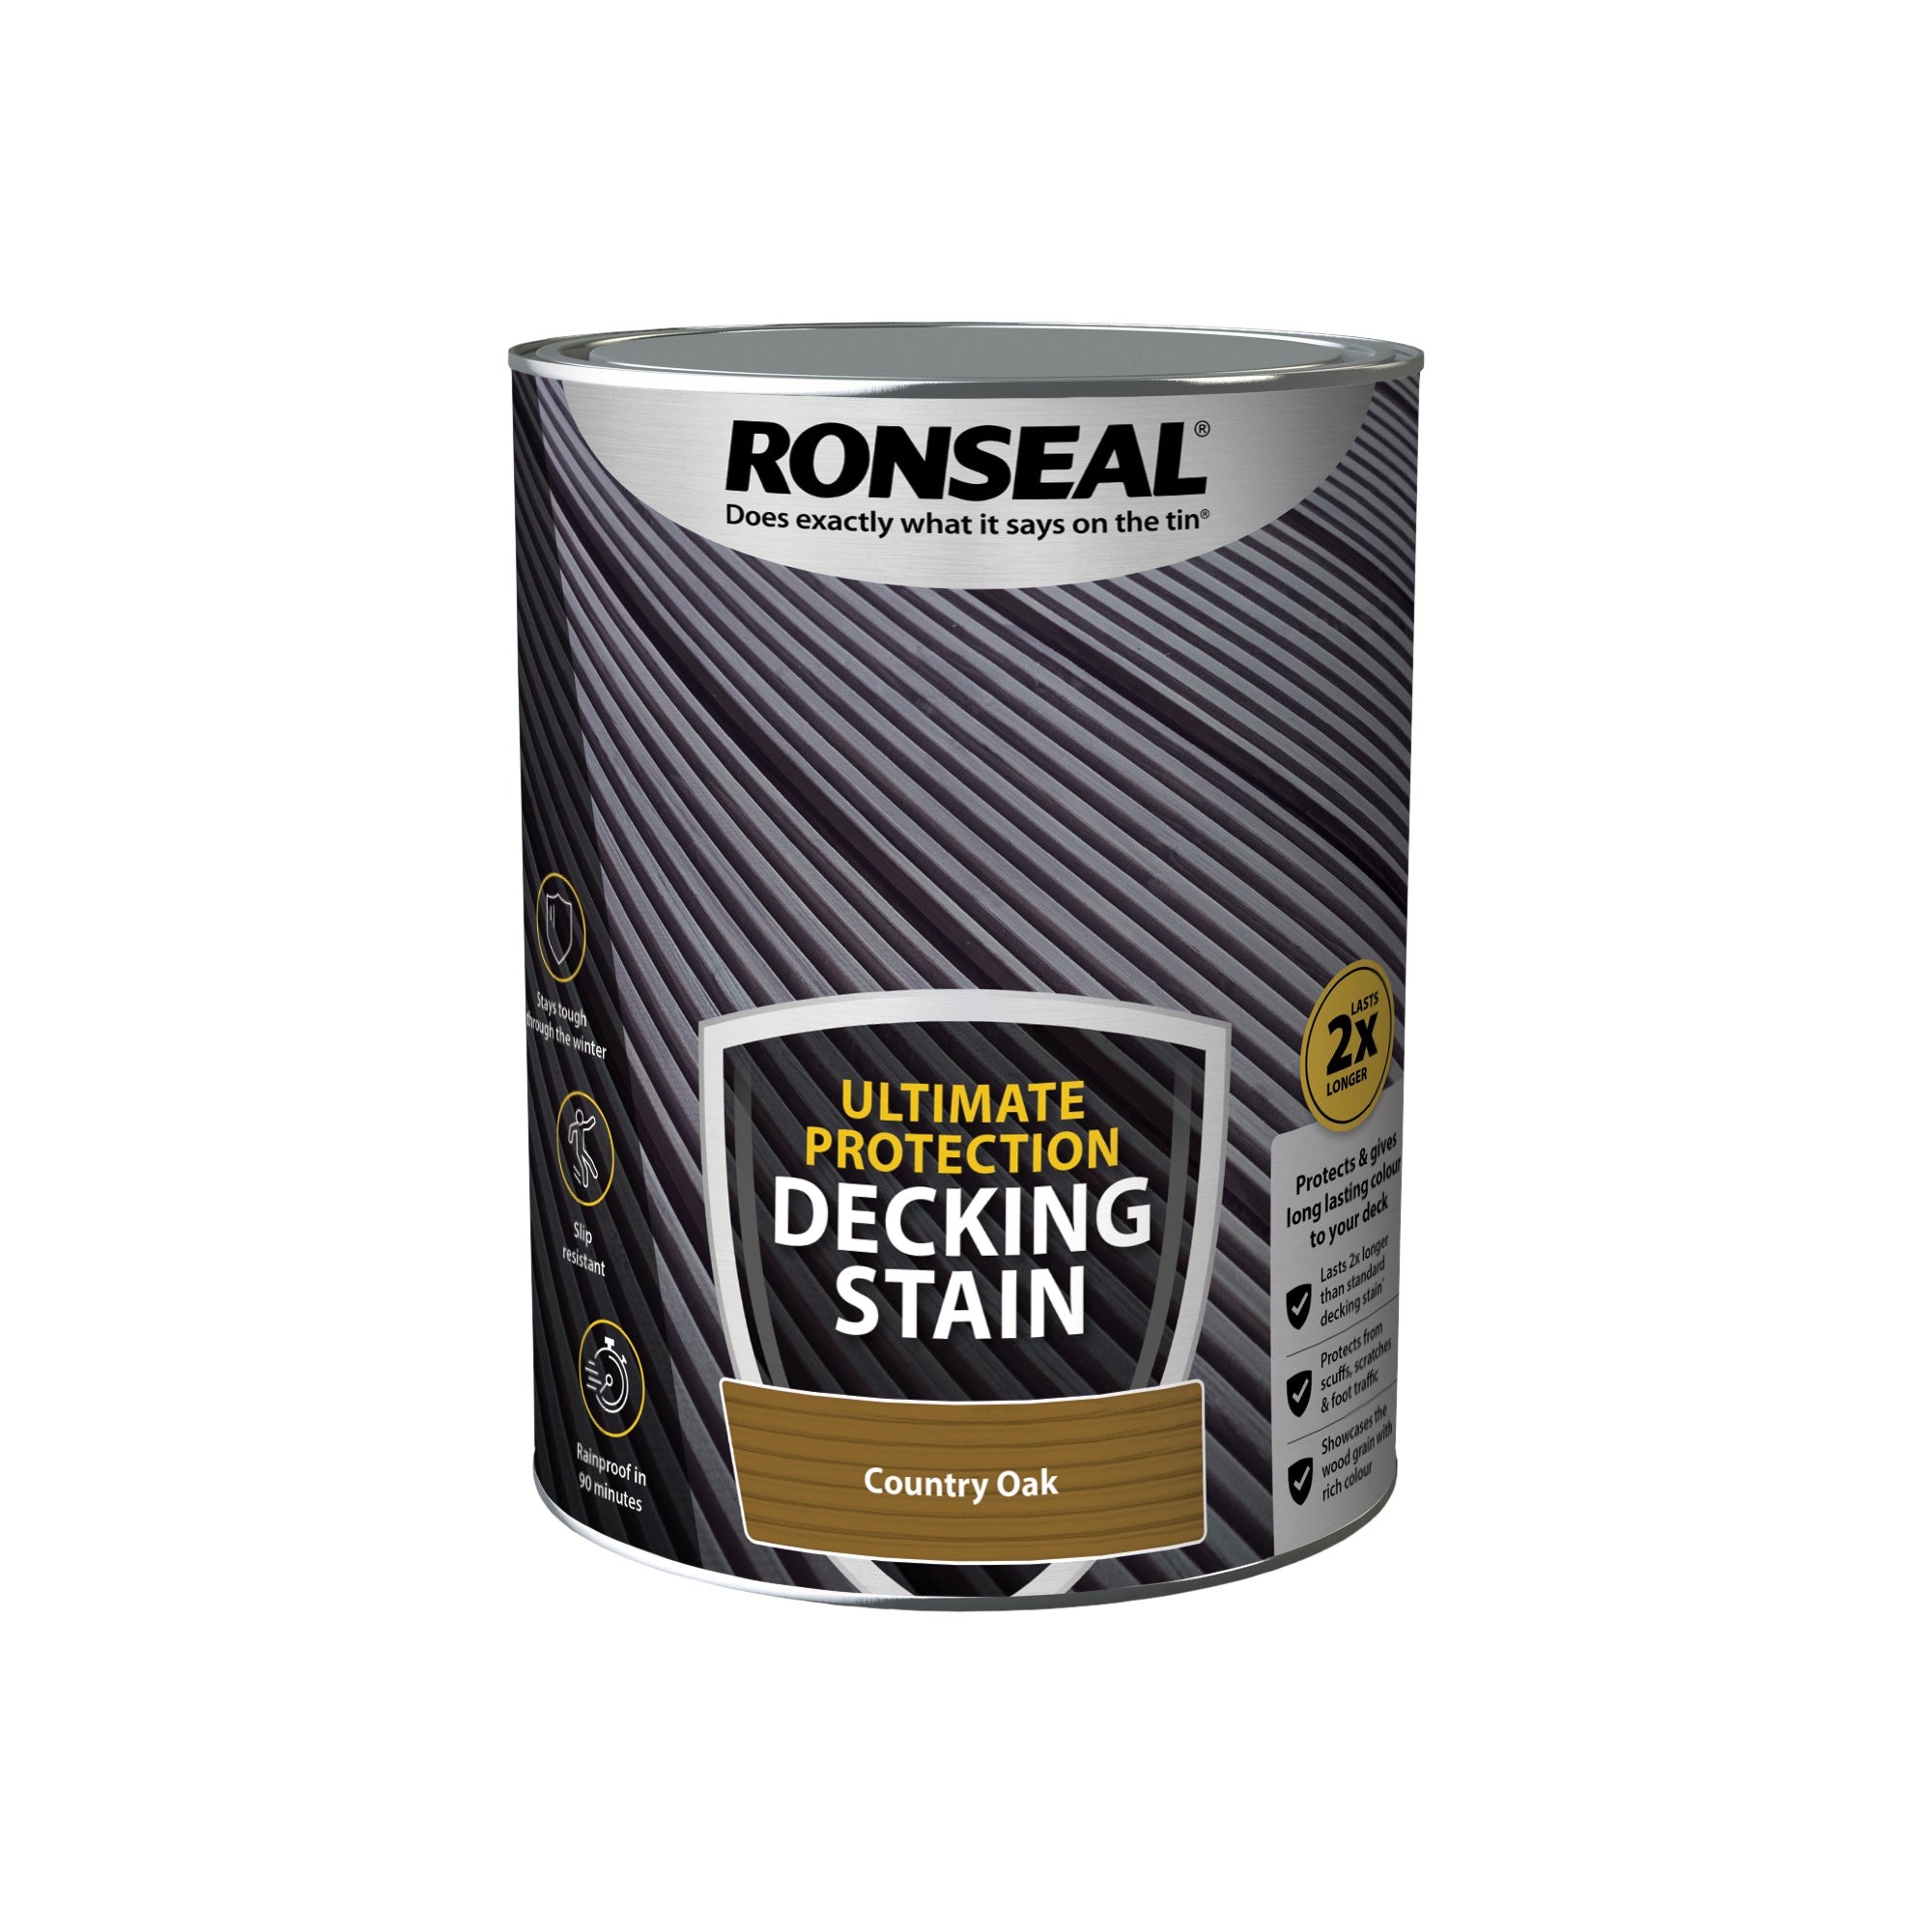 Ronseal-Ultimate-Protection-Decking-Stain-Country-Oak-5L